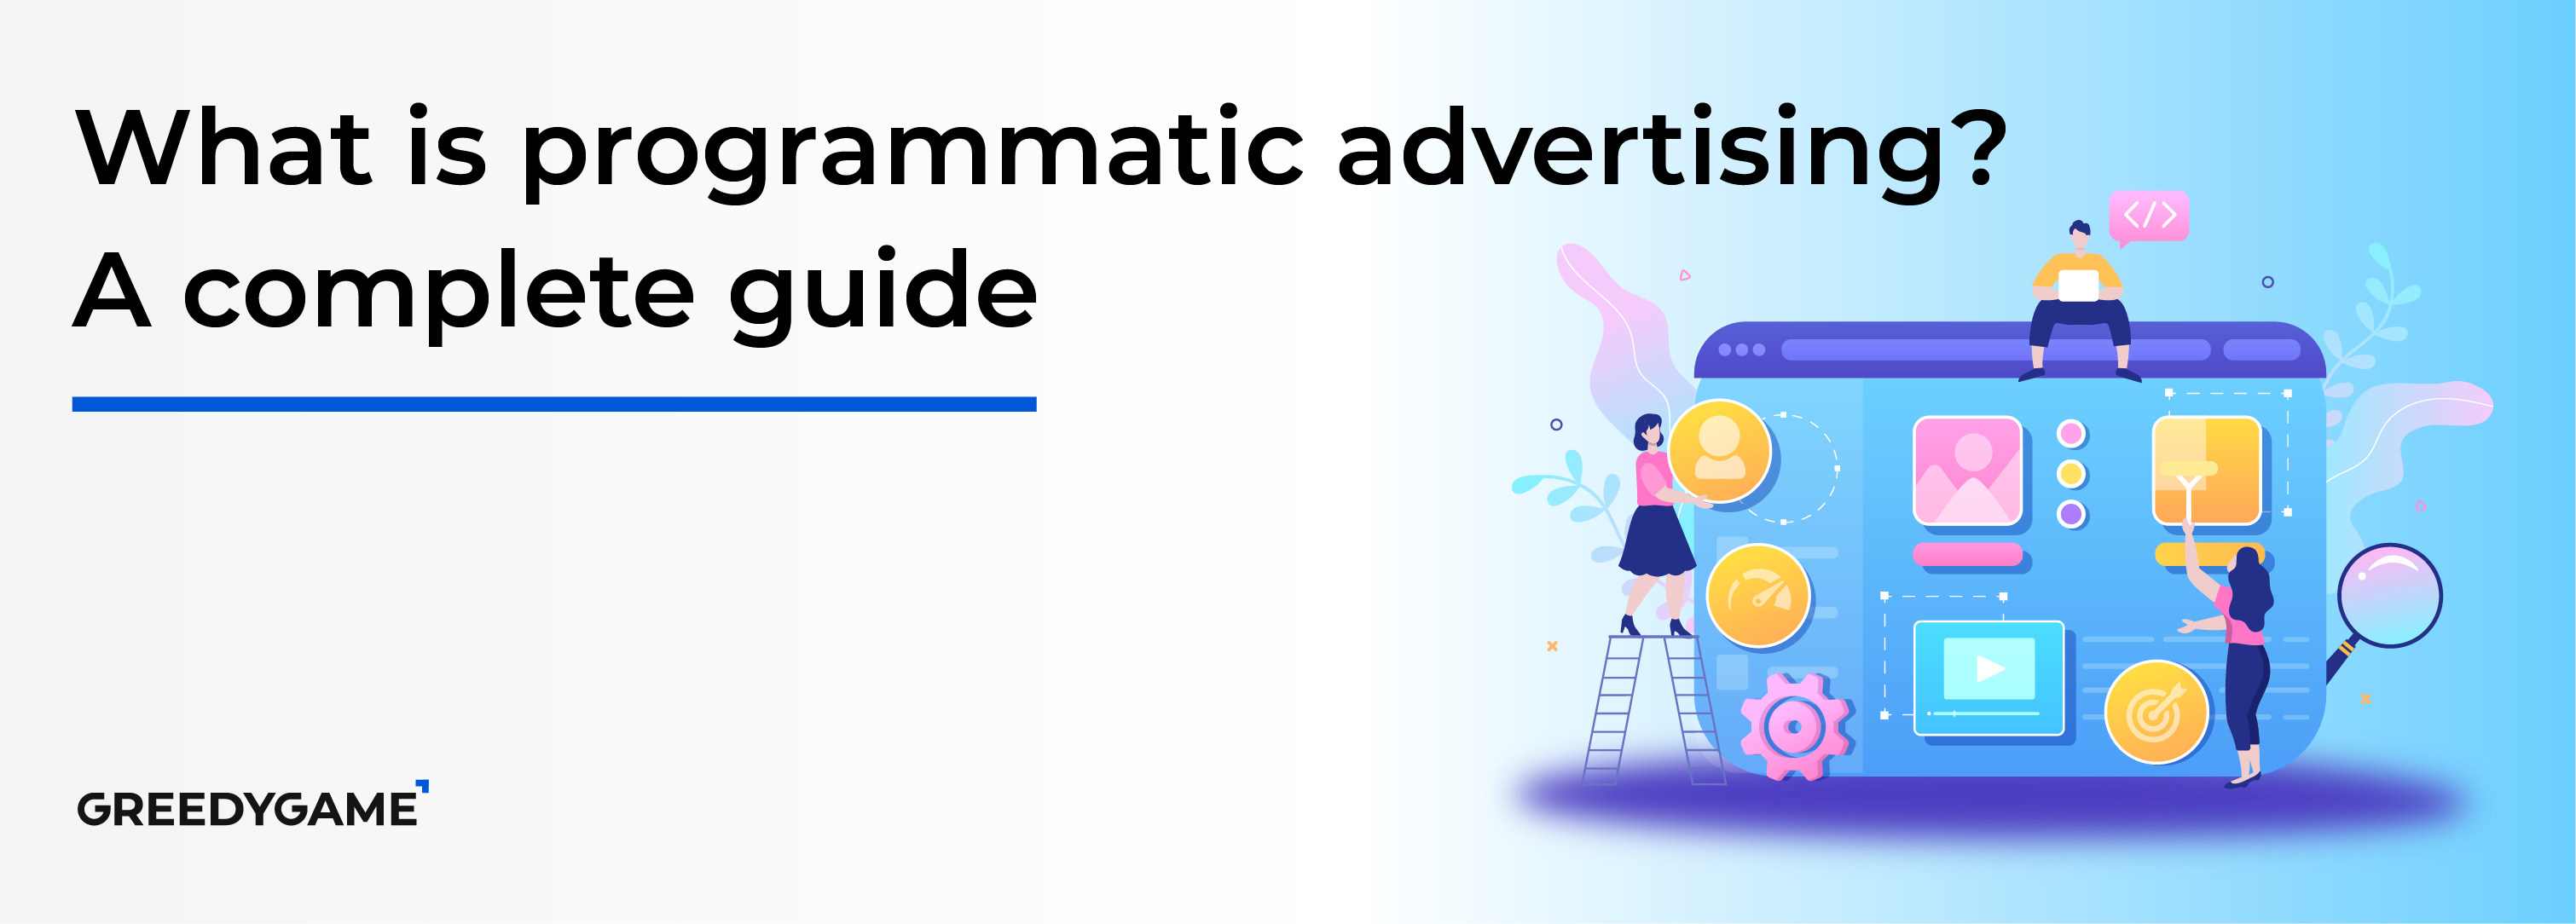 What is programmatic advertising